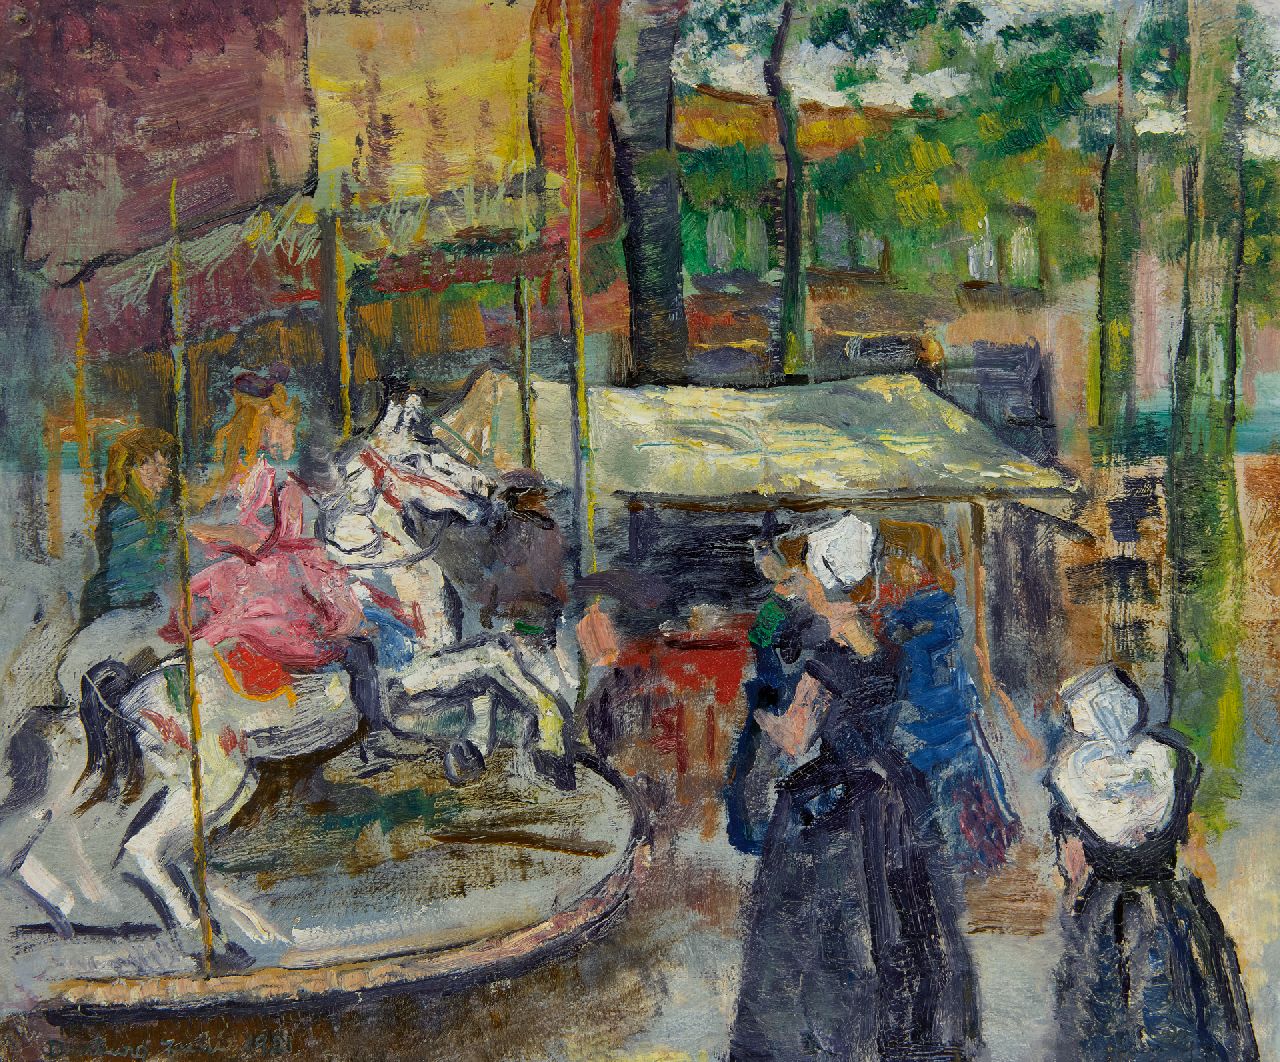 Góth C.  | Charlotte 'Sarika' Góth | Paintings offered for sale | At the fair in Domburg, oil on paper laid down on board 30.5 x 36.7 cm, signed l.r. and dated 'Juli 1921'